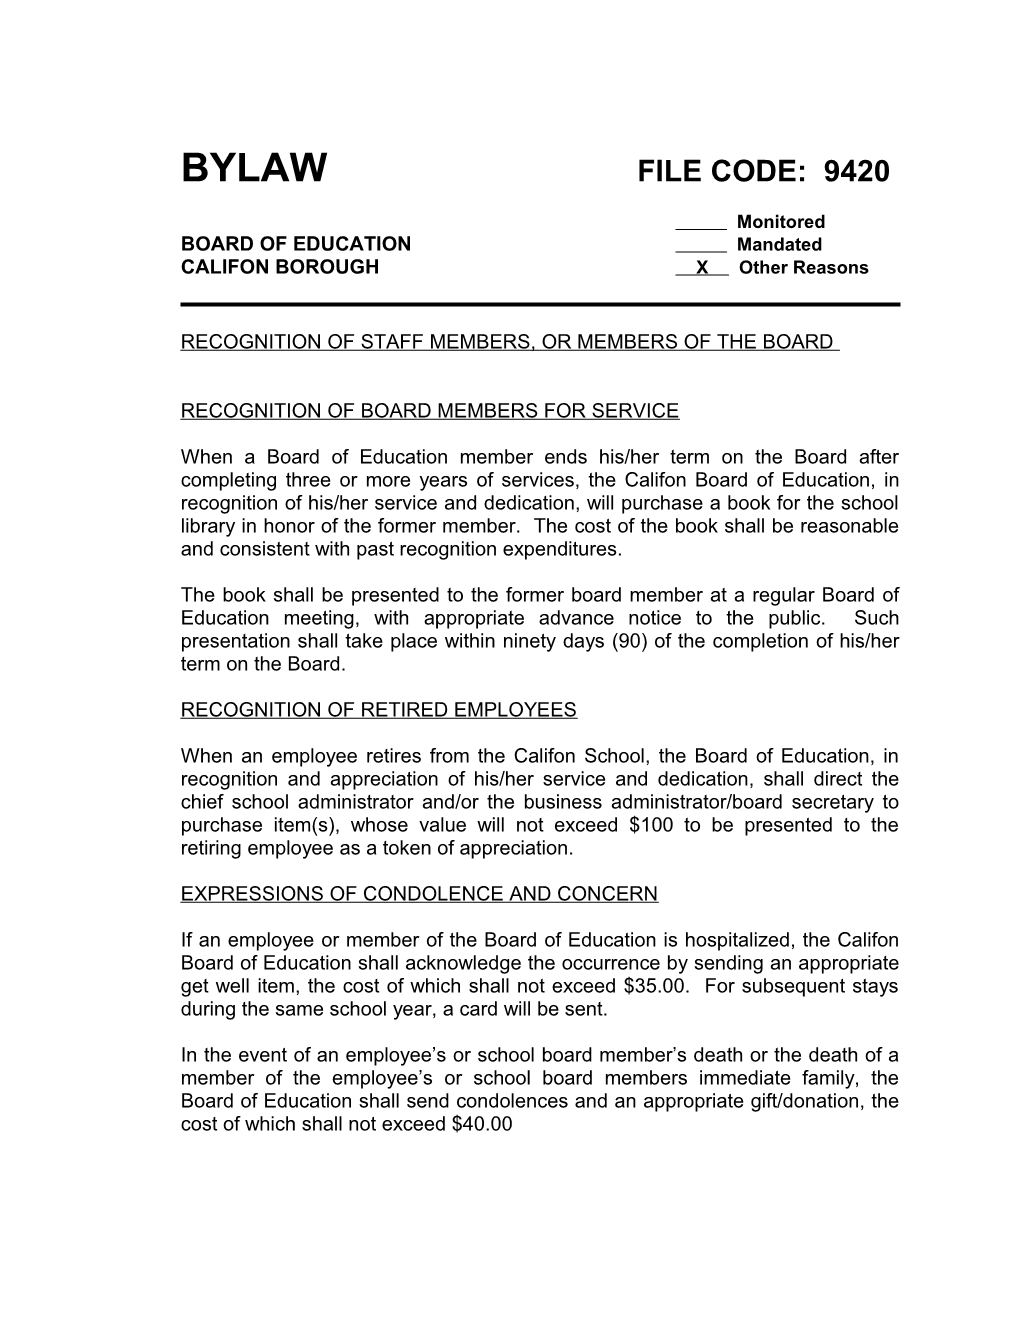 RECOGNITION of STAFF and MEMBERS of the BOARD (Cont D) FILE CODE: 9420